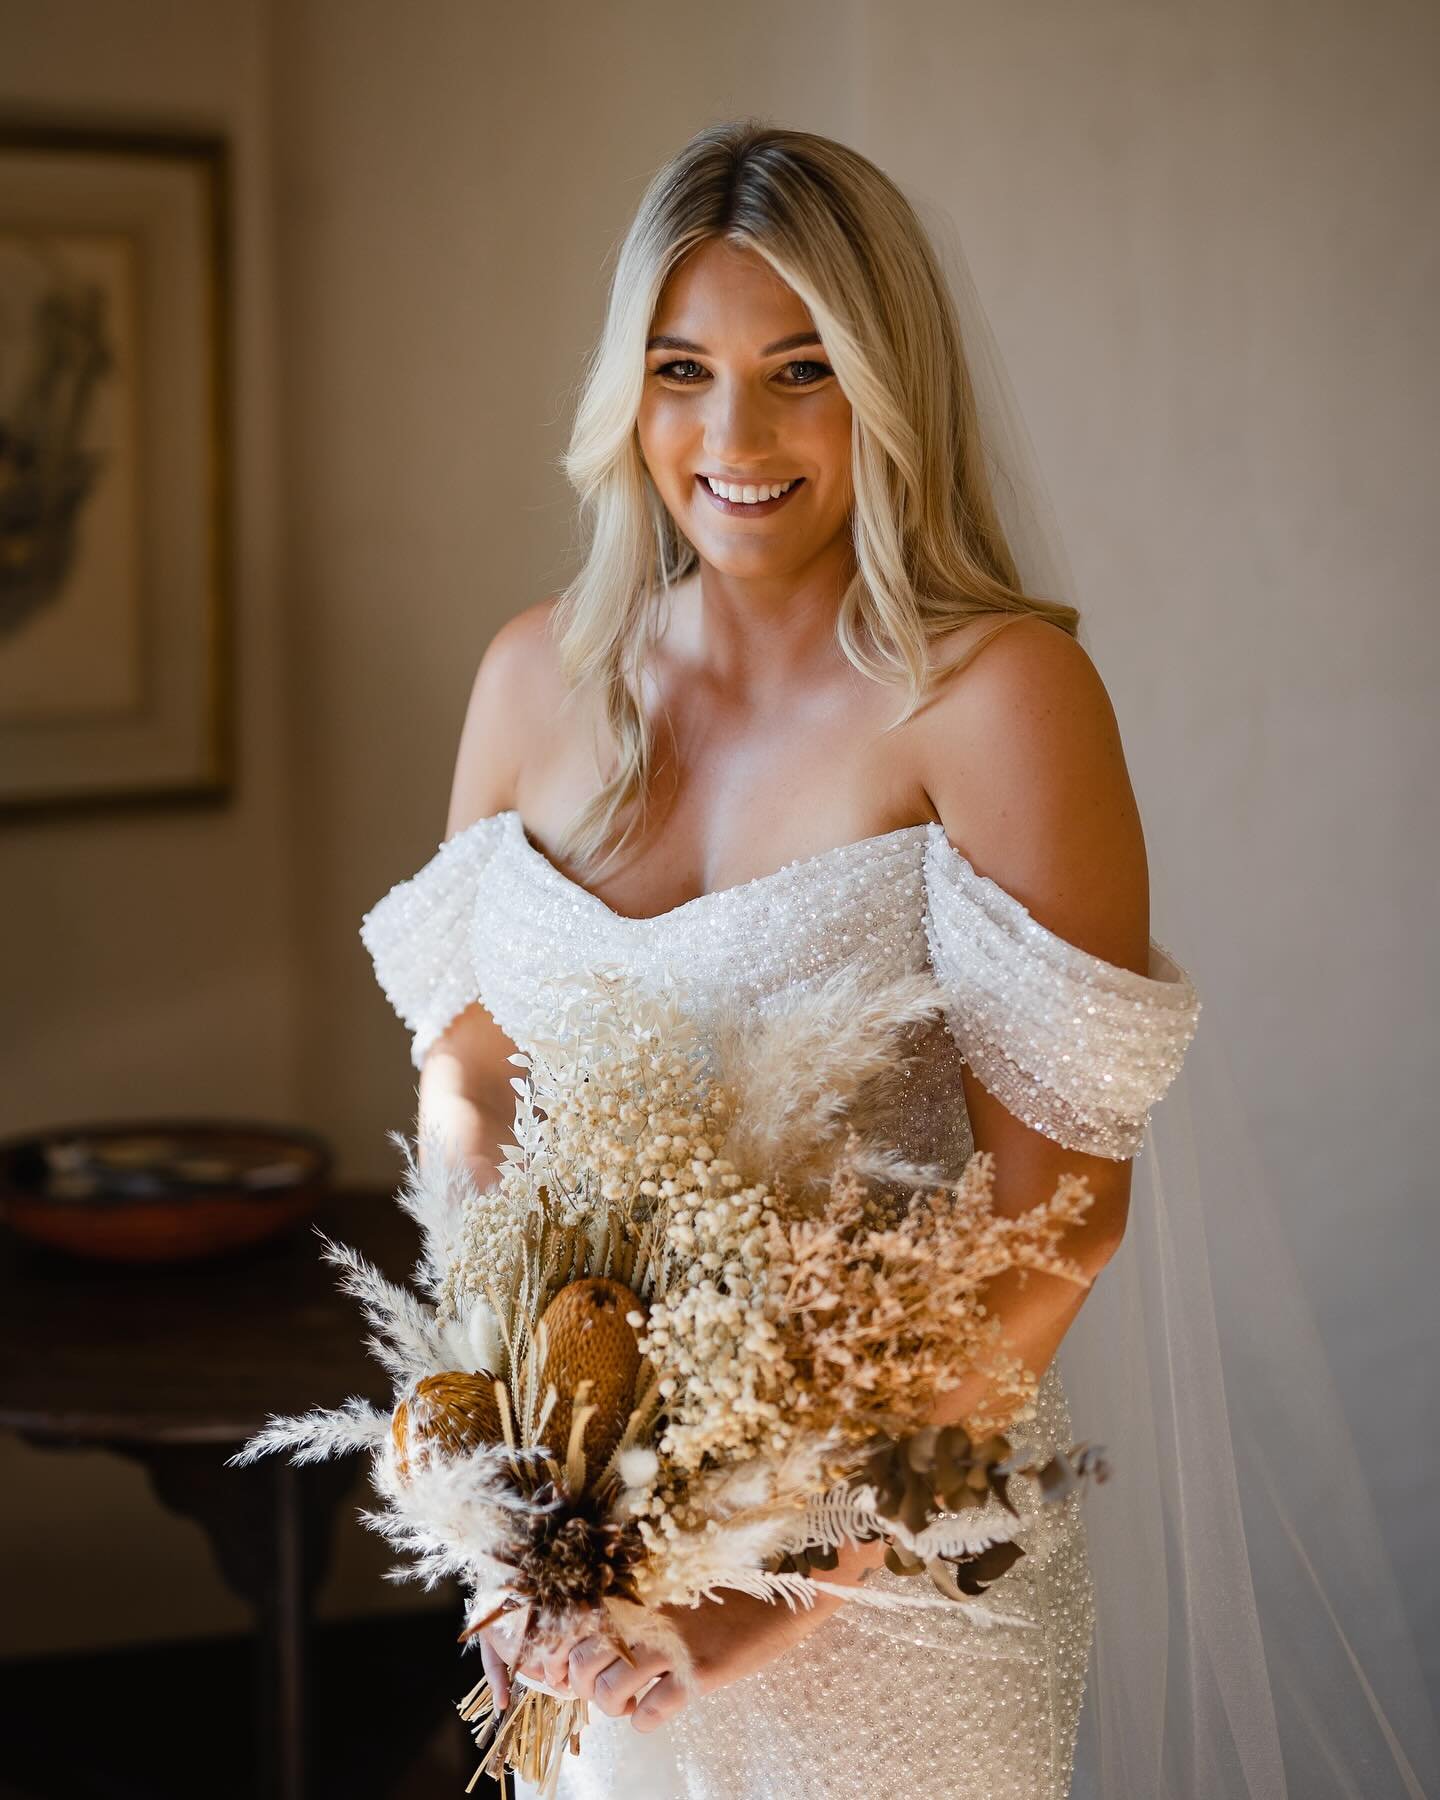 Mariah&rsquo;s bridal look was pure elegance with a down-to-earth rustic flair 💕🌿

Dress by @lutka_boutique 

@mariah.warman 
@jamieewarman 
@photogerson 
@tillerdining 
@coco_collova 
@emmaharvey.makeup
.
.
.
#loveineverydetail
#yourcelebrantbesti